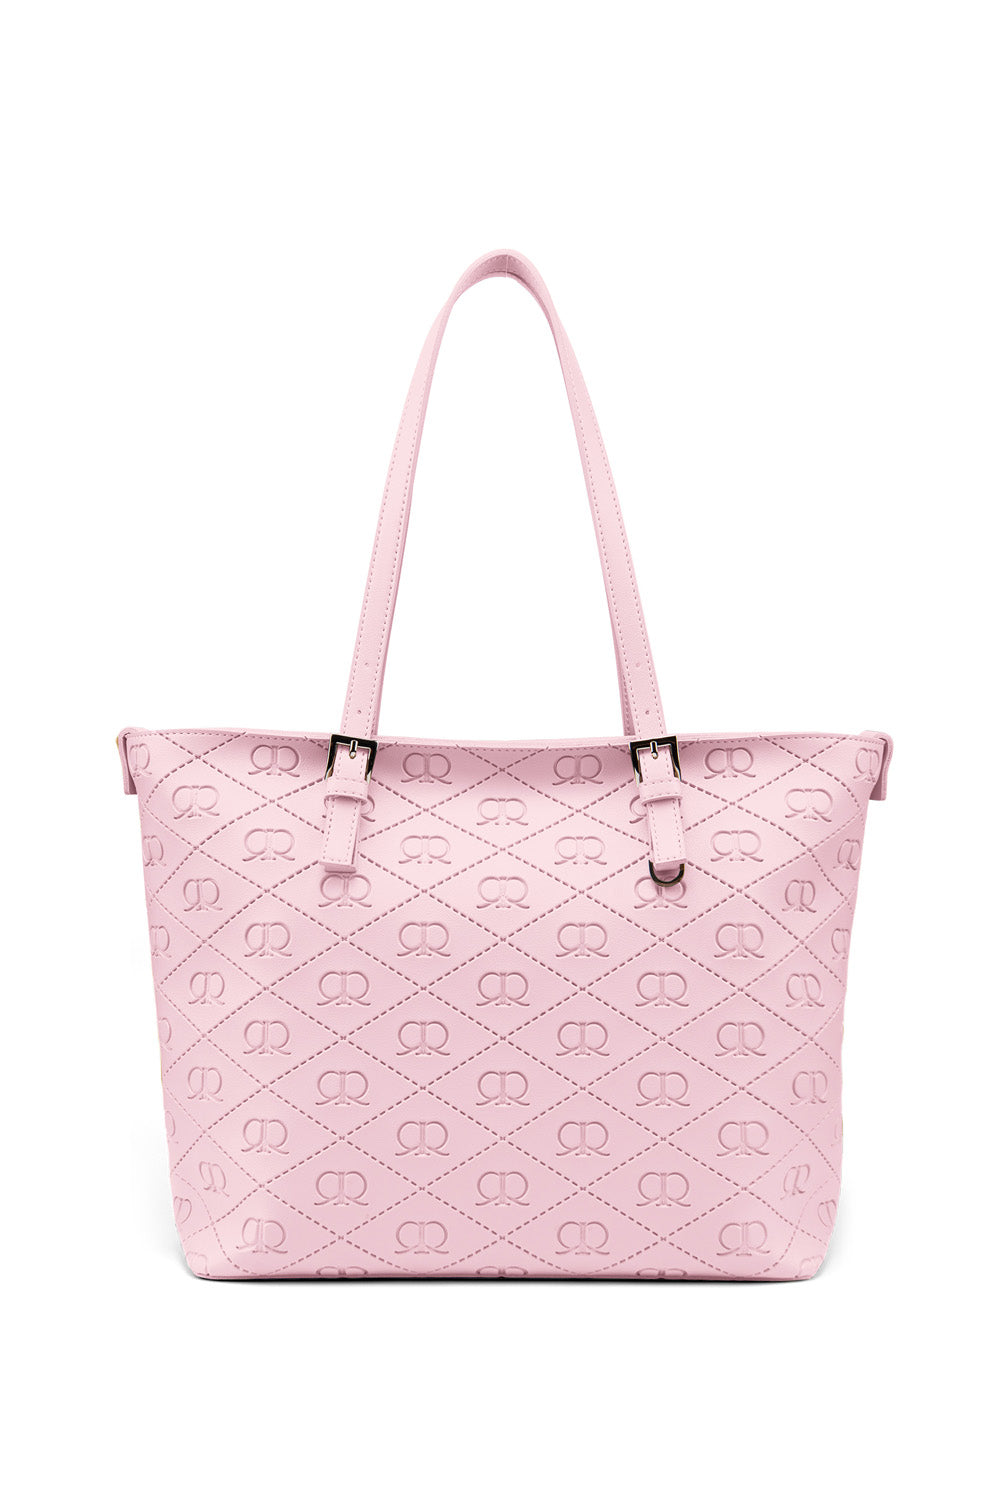 RR Basic Tote in Pink